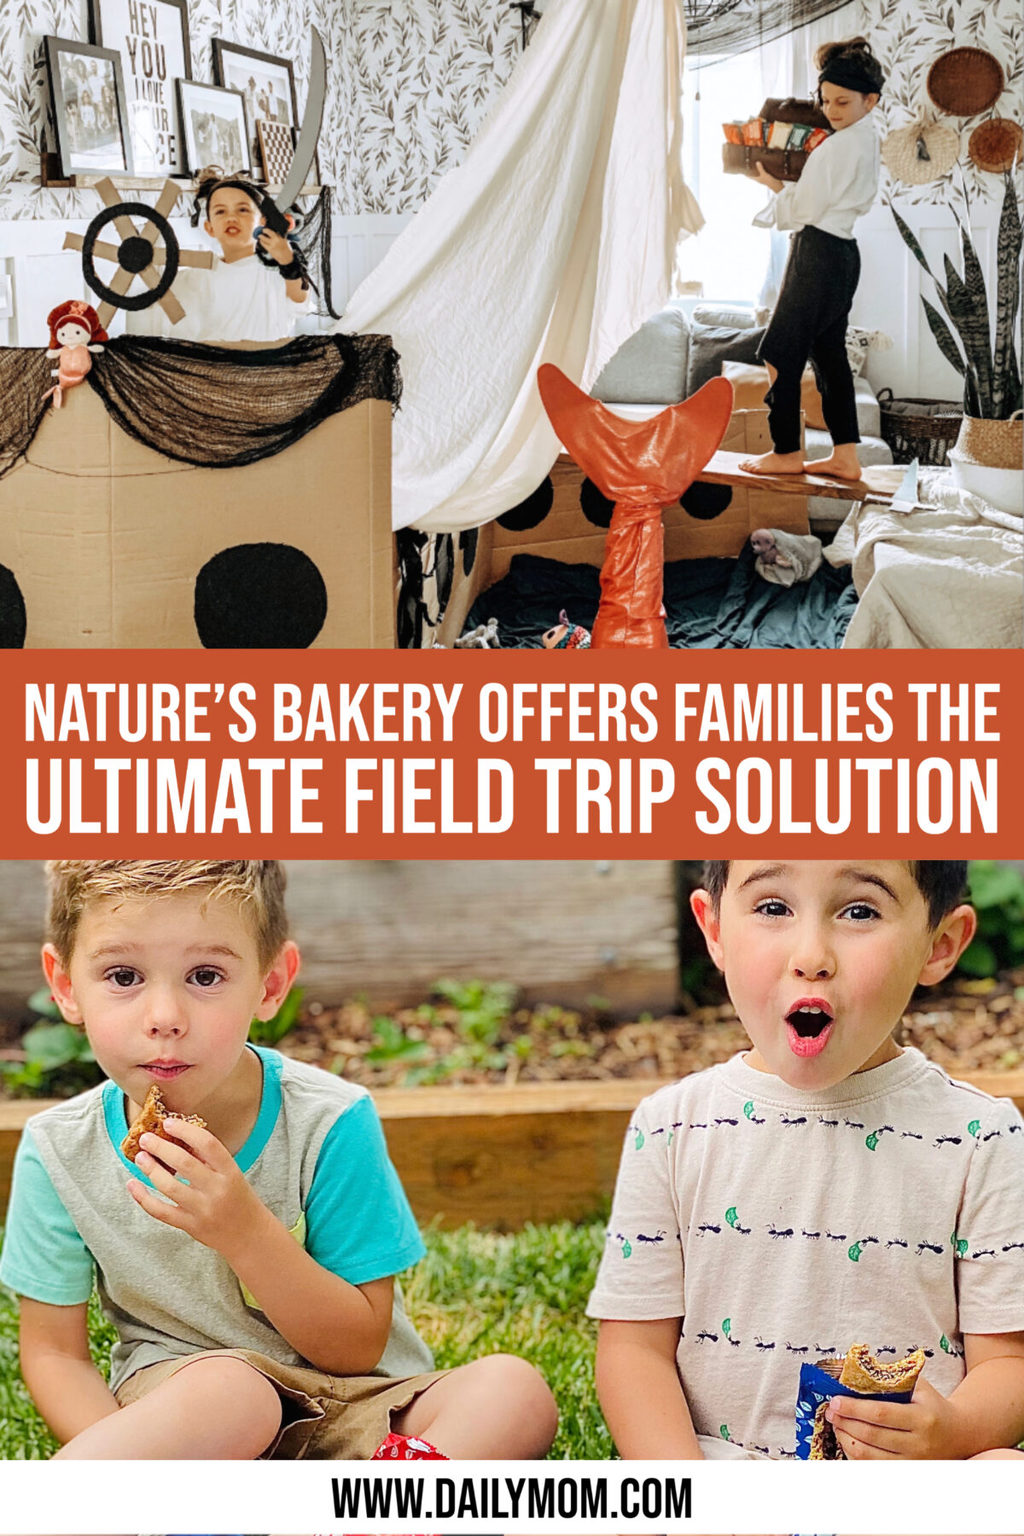 Nature’s Bakery Offers Families The Ultimate Field Trip Solution This School Year (It’s Dino-Mite)!